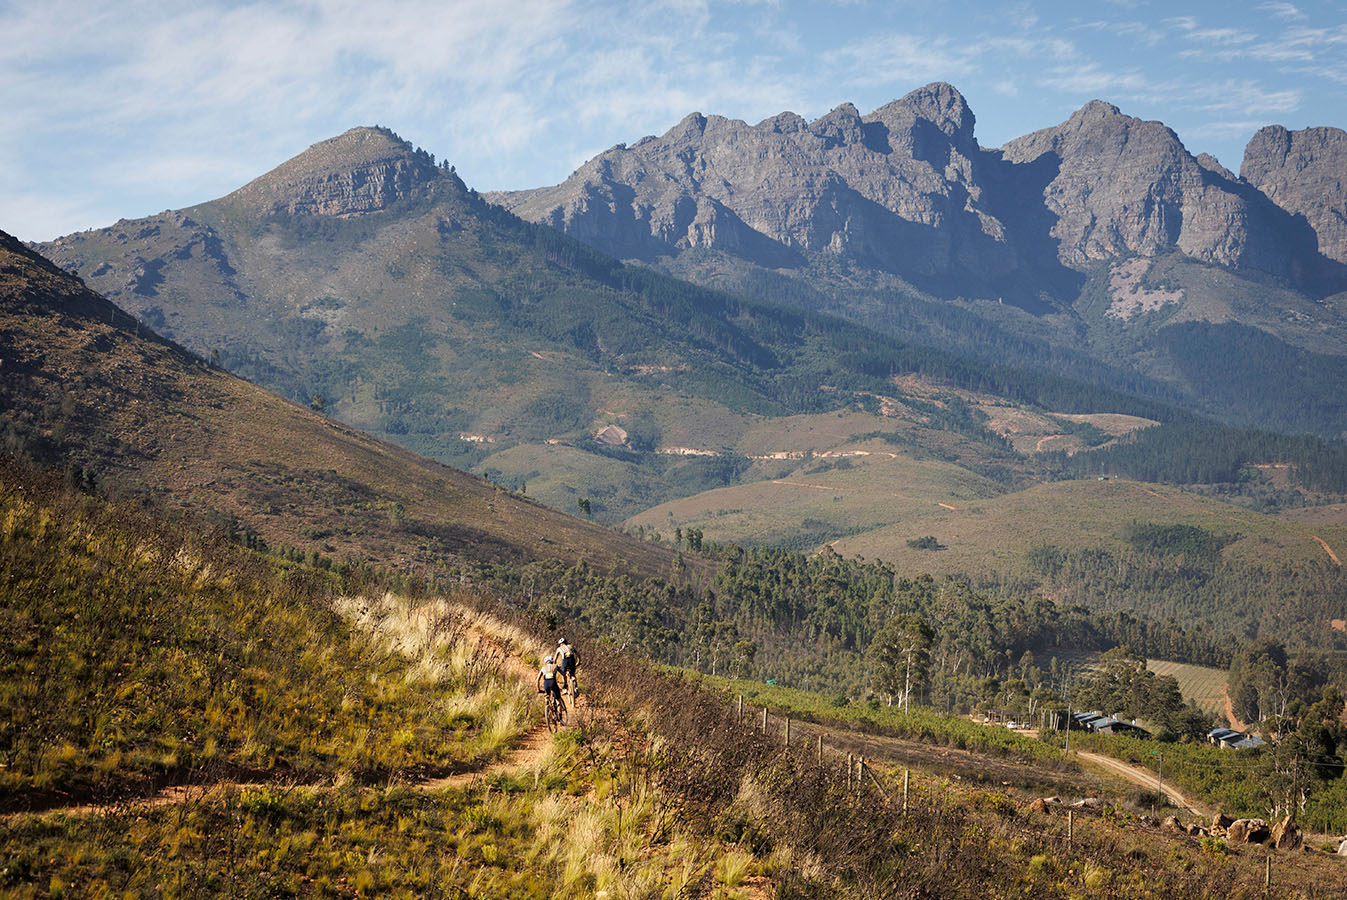 YOUNG AMERICANS | RIDING THE CAPE EPIC